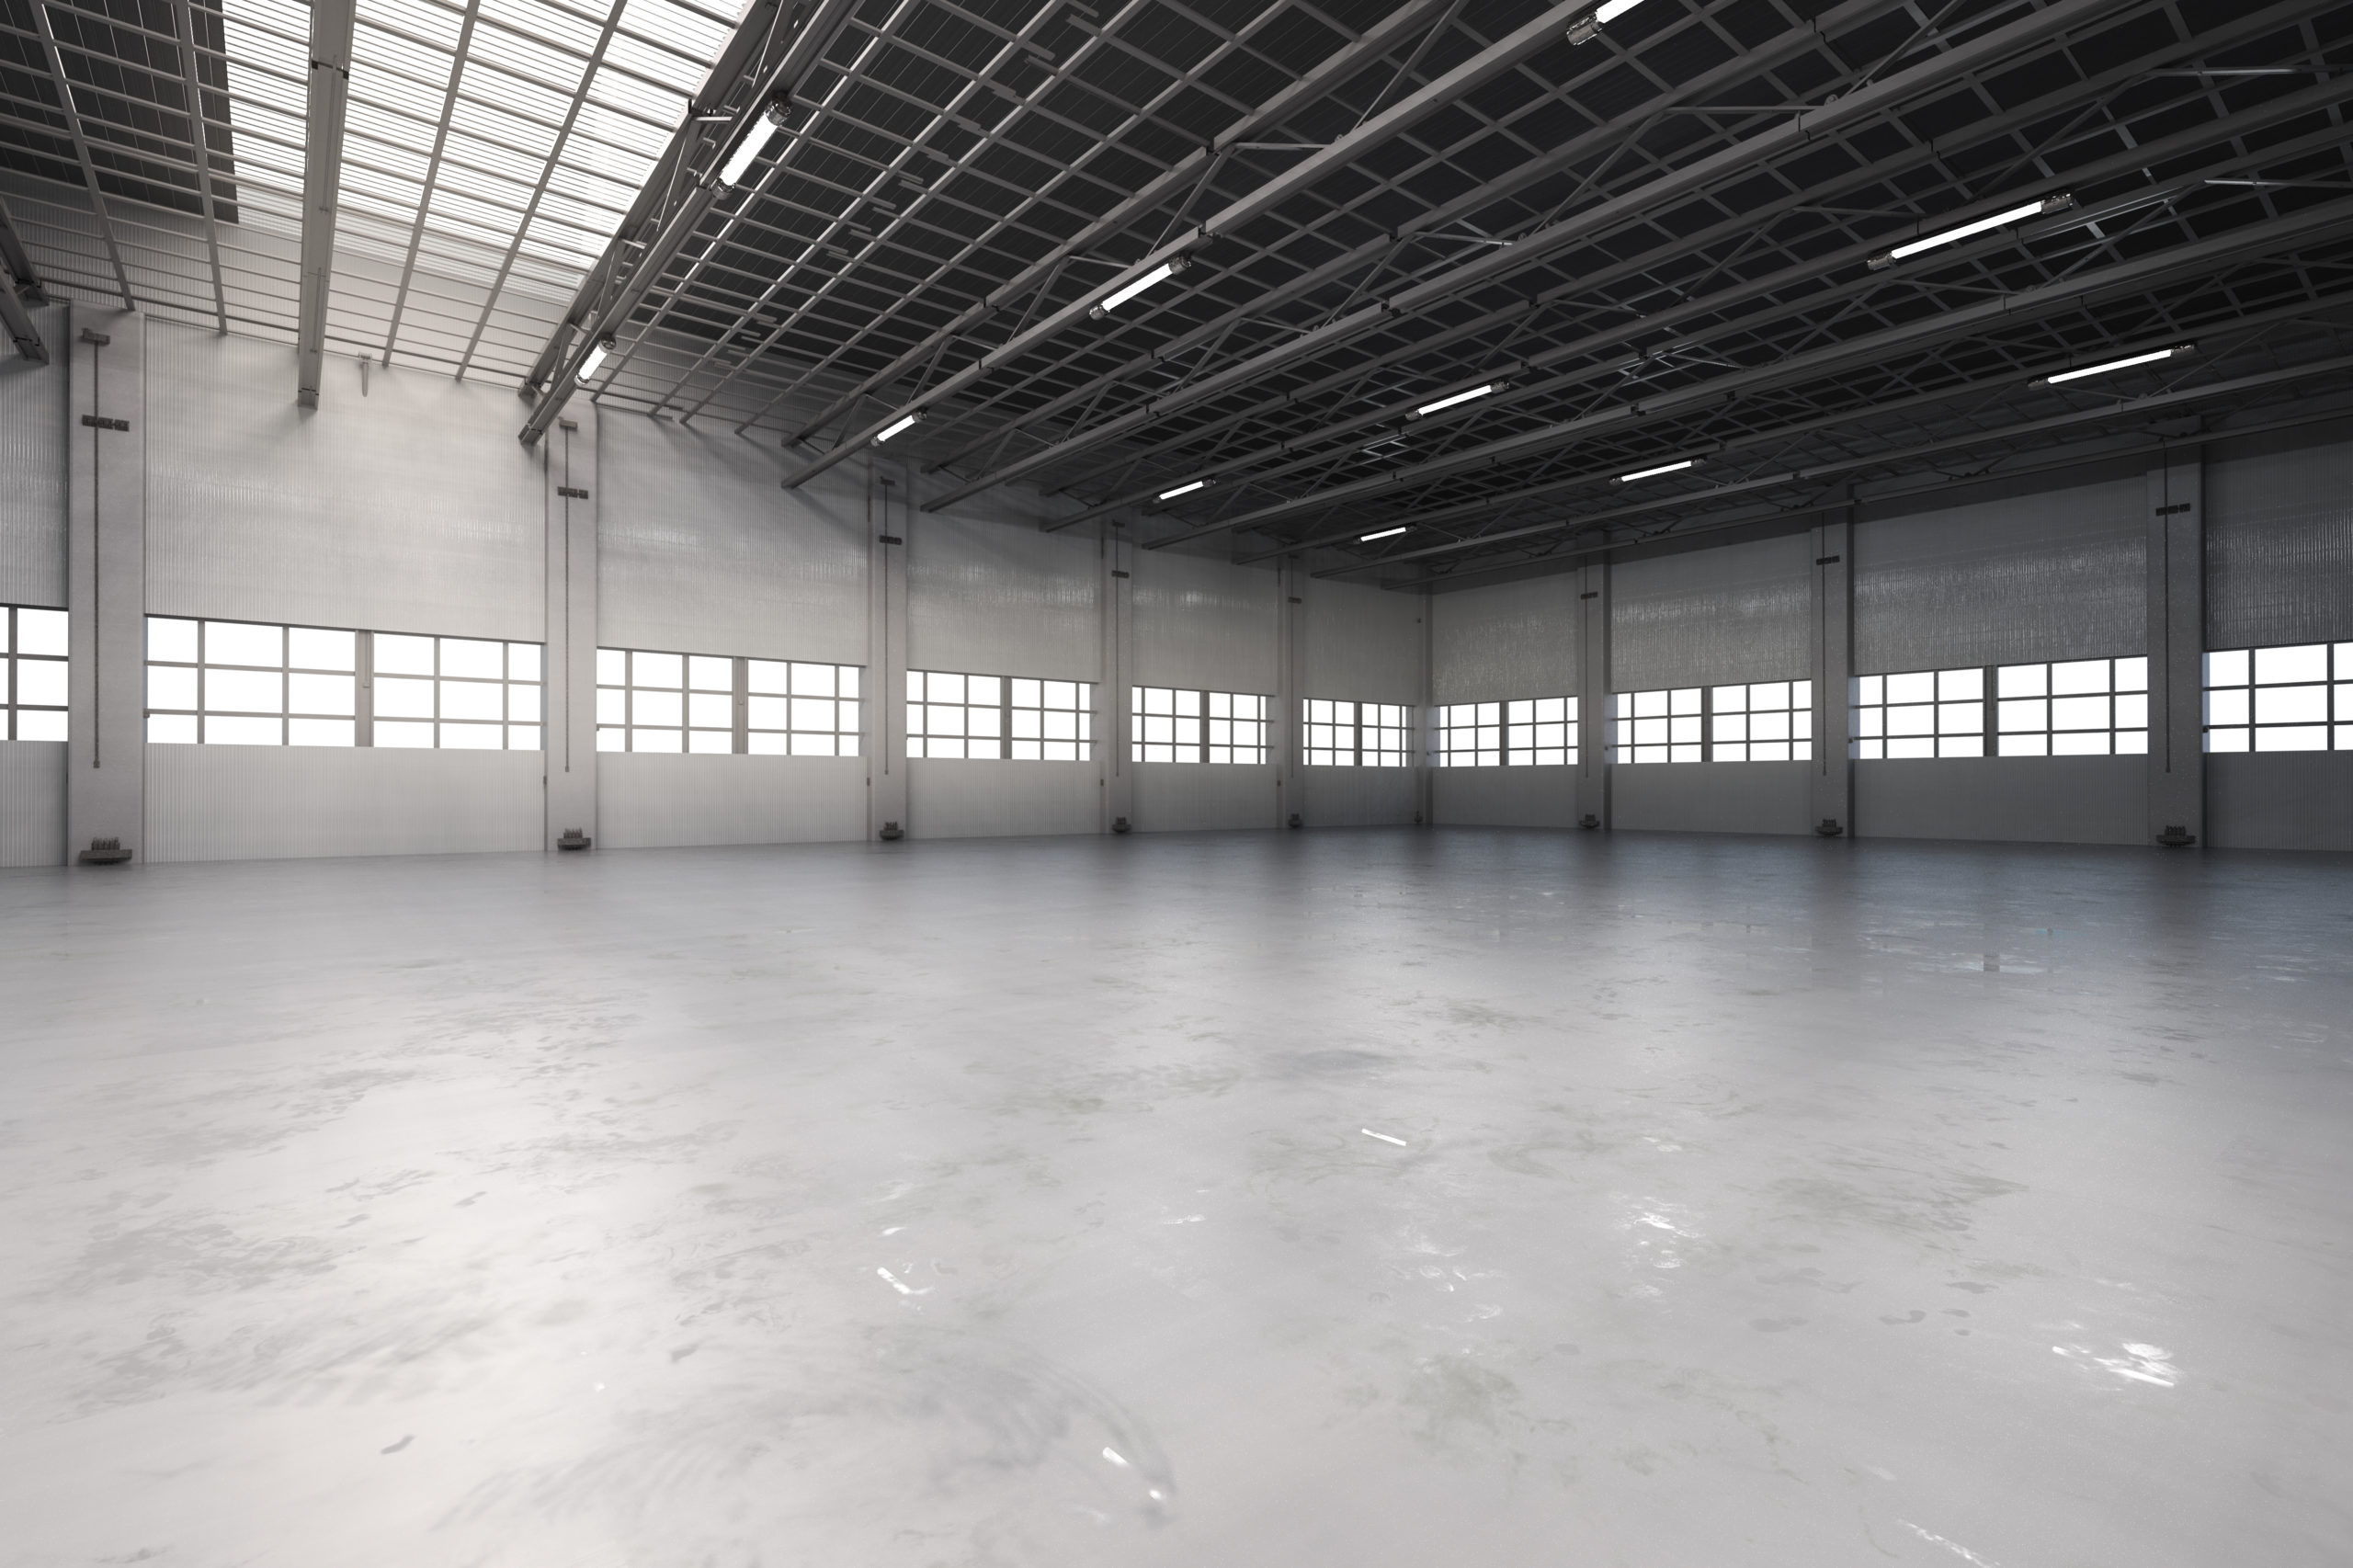 Lights glare over the floor of a concrete warehouse that has yet to undergo warehouse optimization.